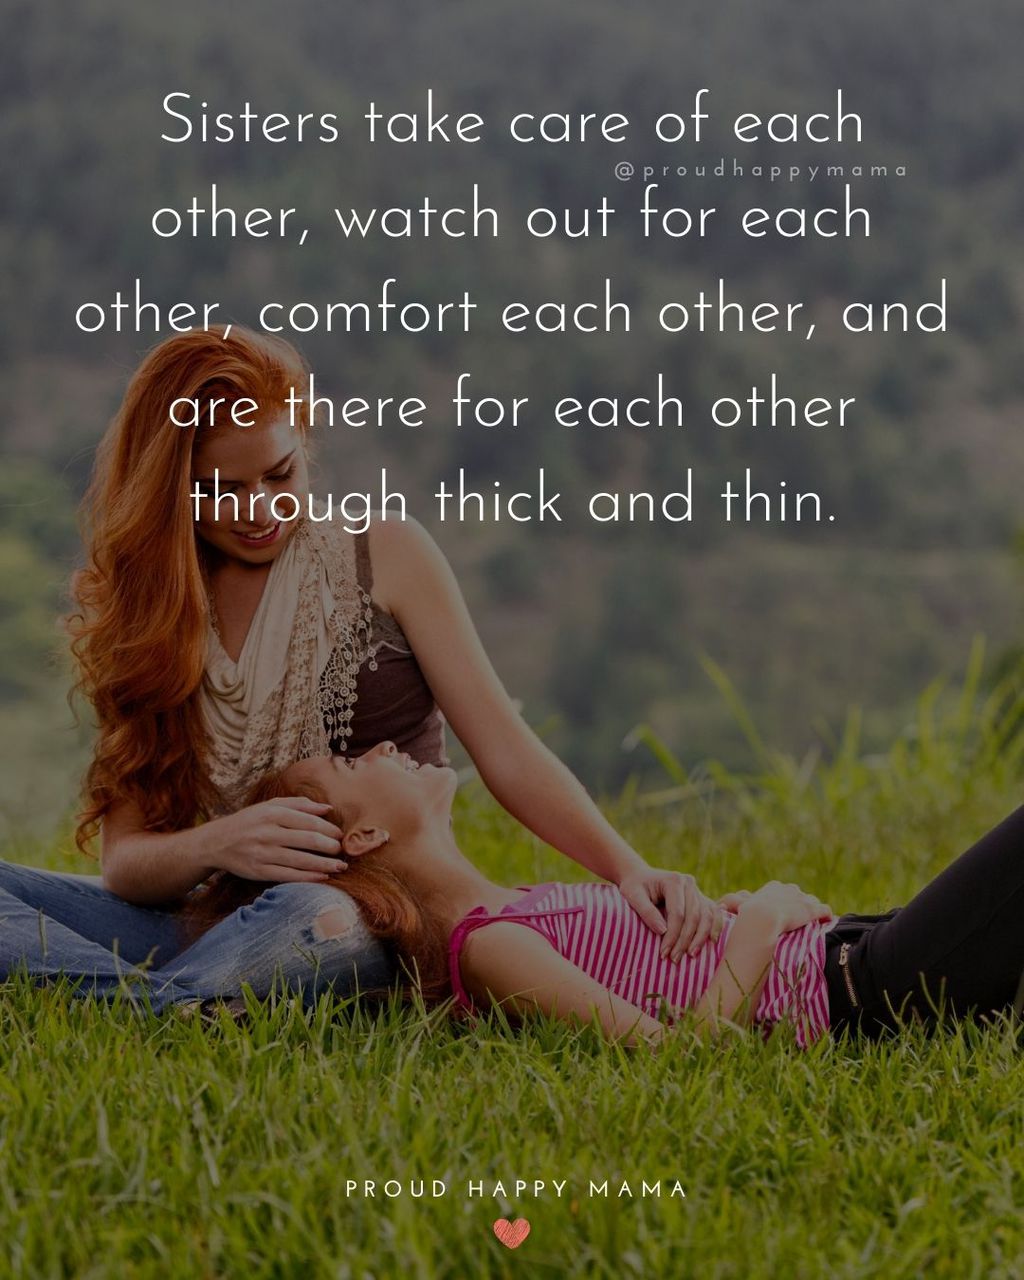 Sister Quotes - Sisters take care of each other, watch out for each other, comfort each other, and are there for each other through thick and thin.